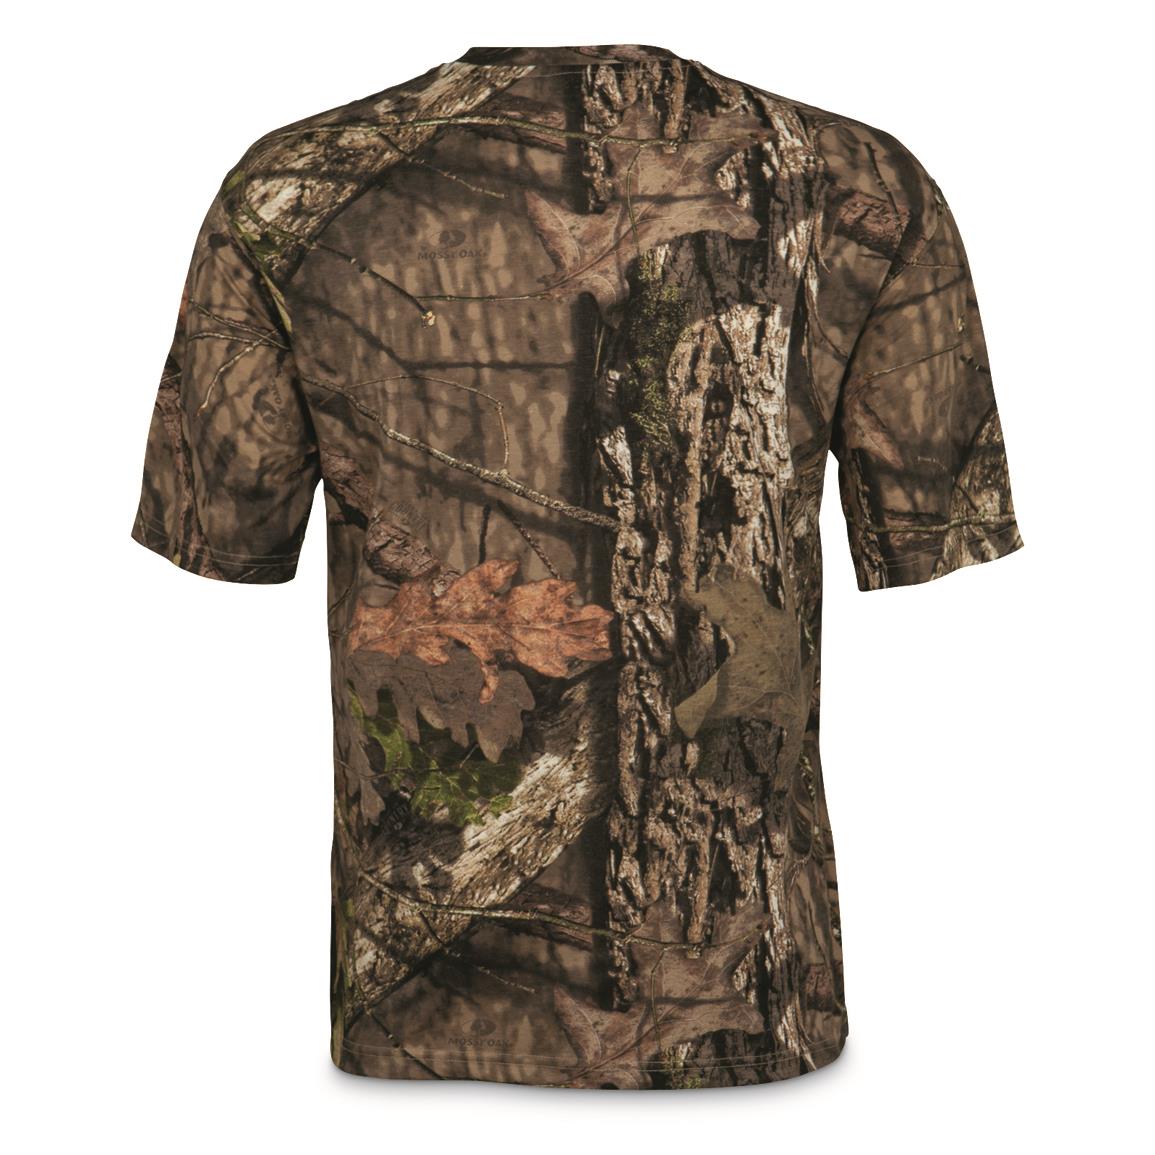 Realtree Xtra Camo 38" chest Camouflage Short Sleeve T-Shirt Size Small 